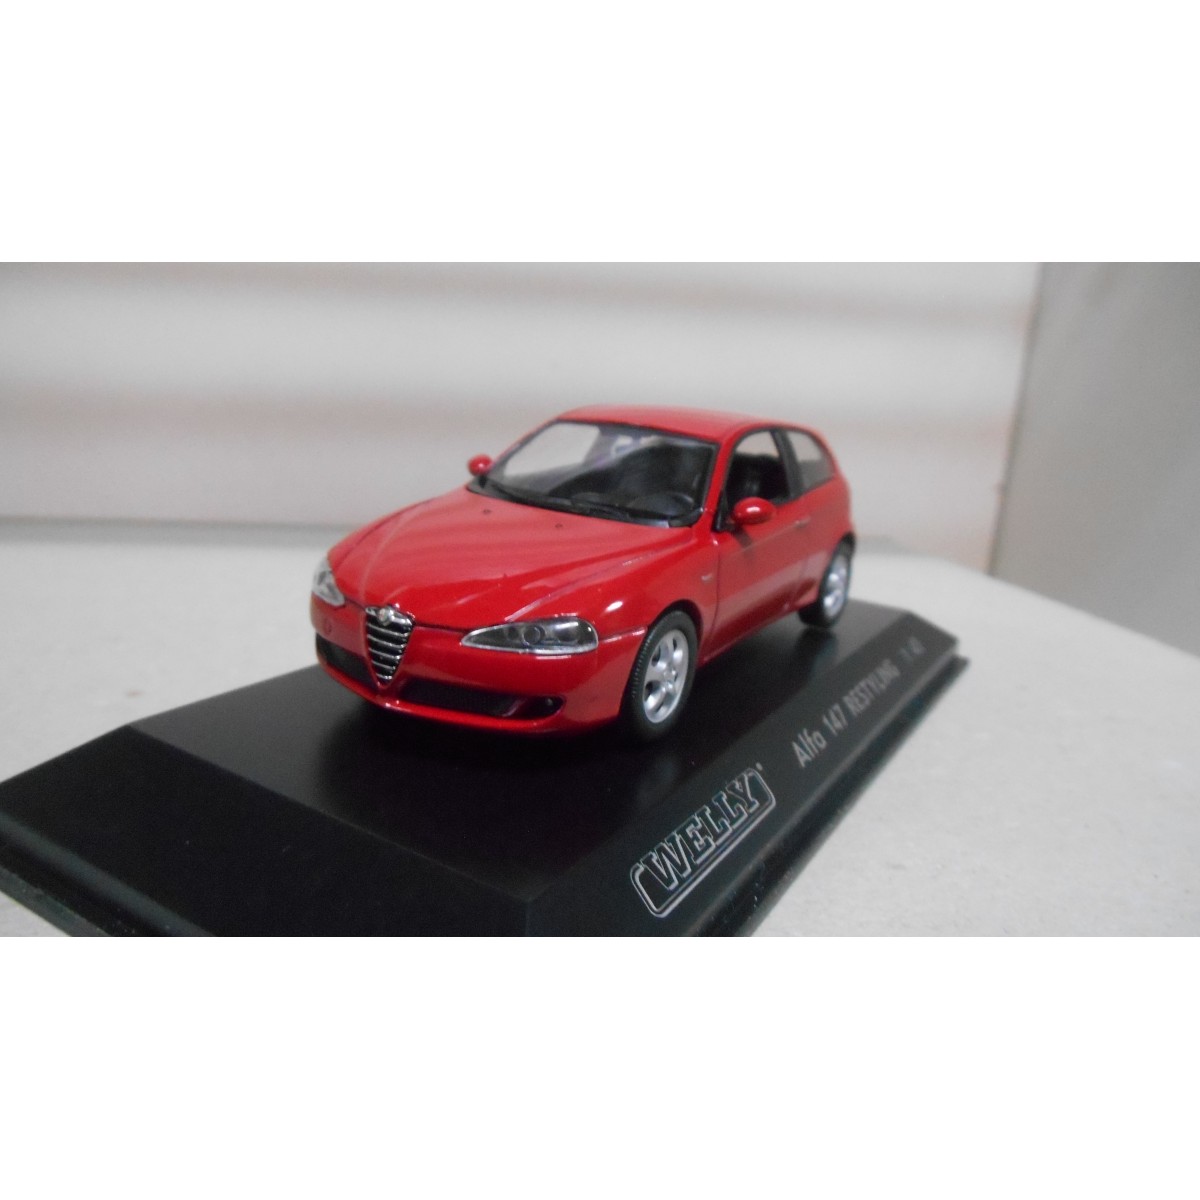 ALFA ROMEO 147 RESTYLING RED 1:43 WELLY - BCN STOCK CARS